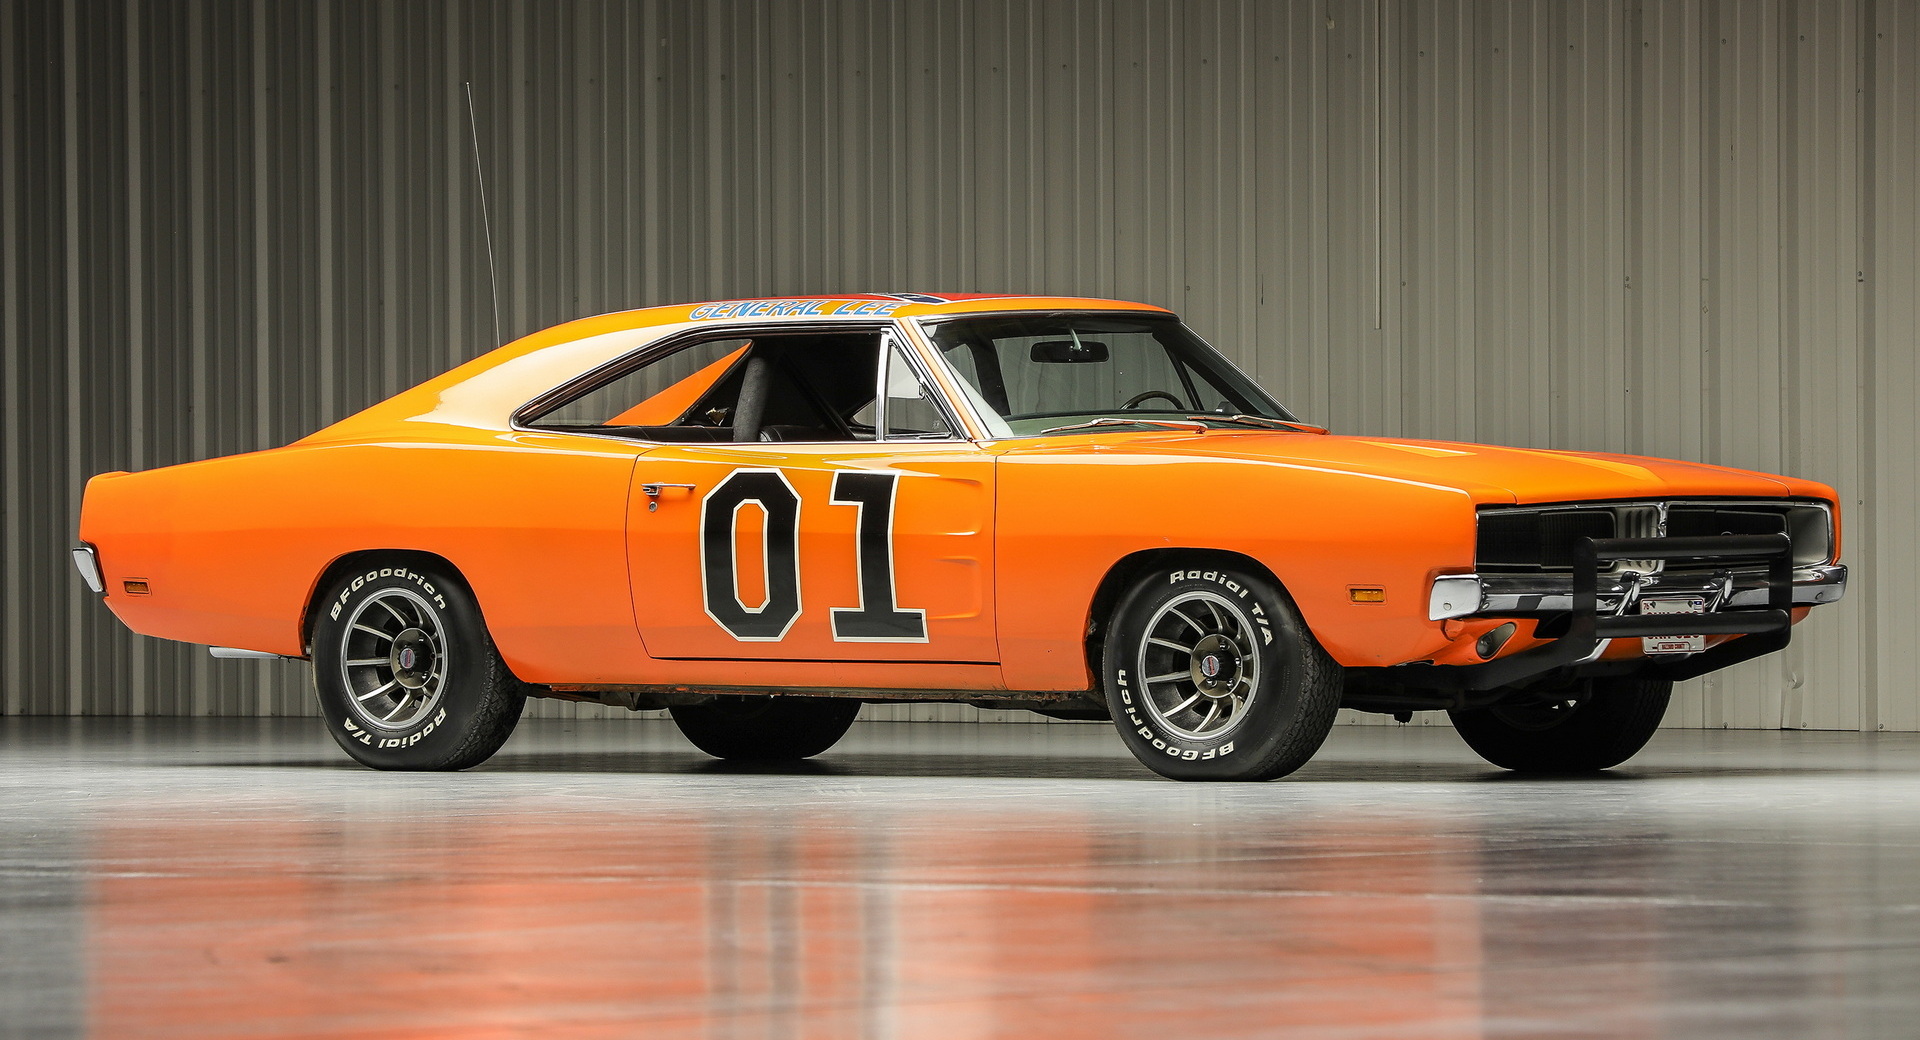 Dukes of Hazzard' General Lee with Confederate flag will stay in auto museum